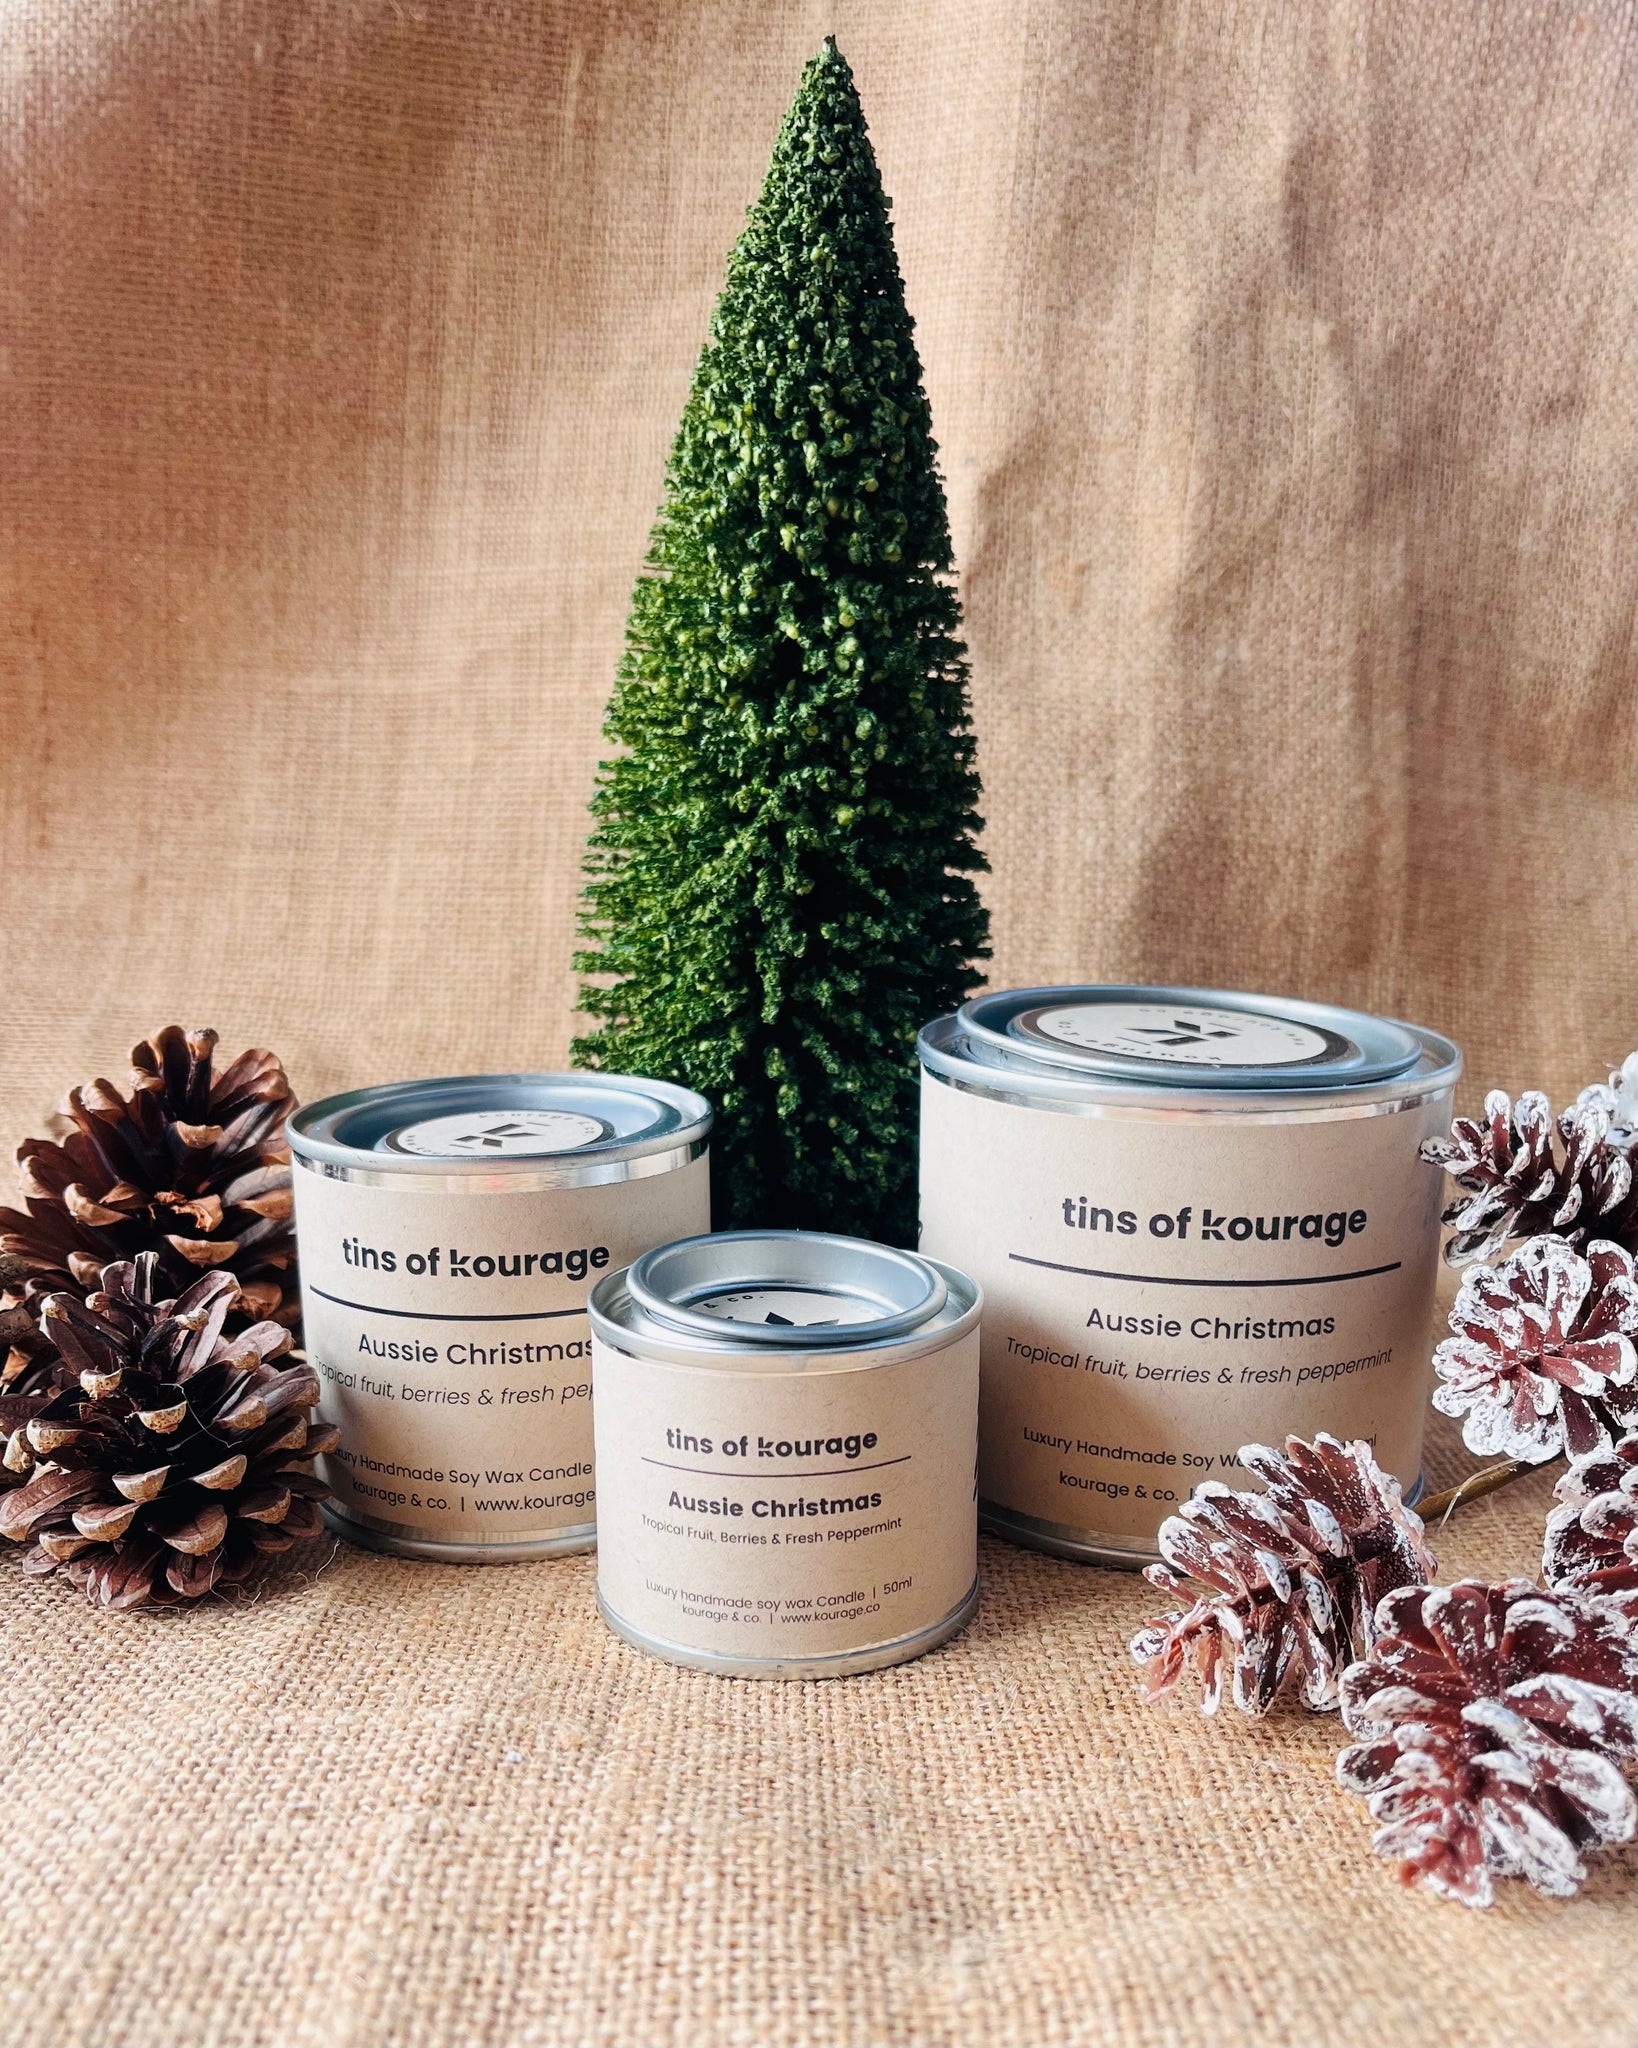 Aussie Christmas Soy Wax Candle